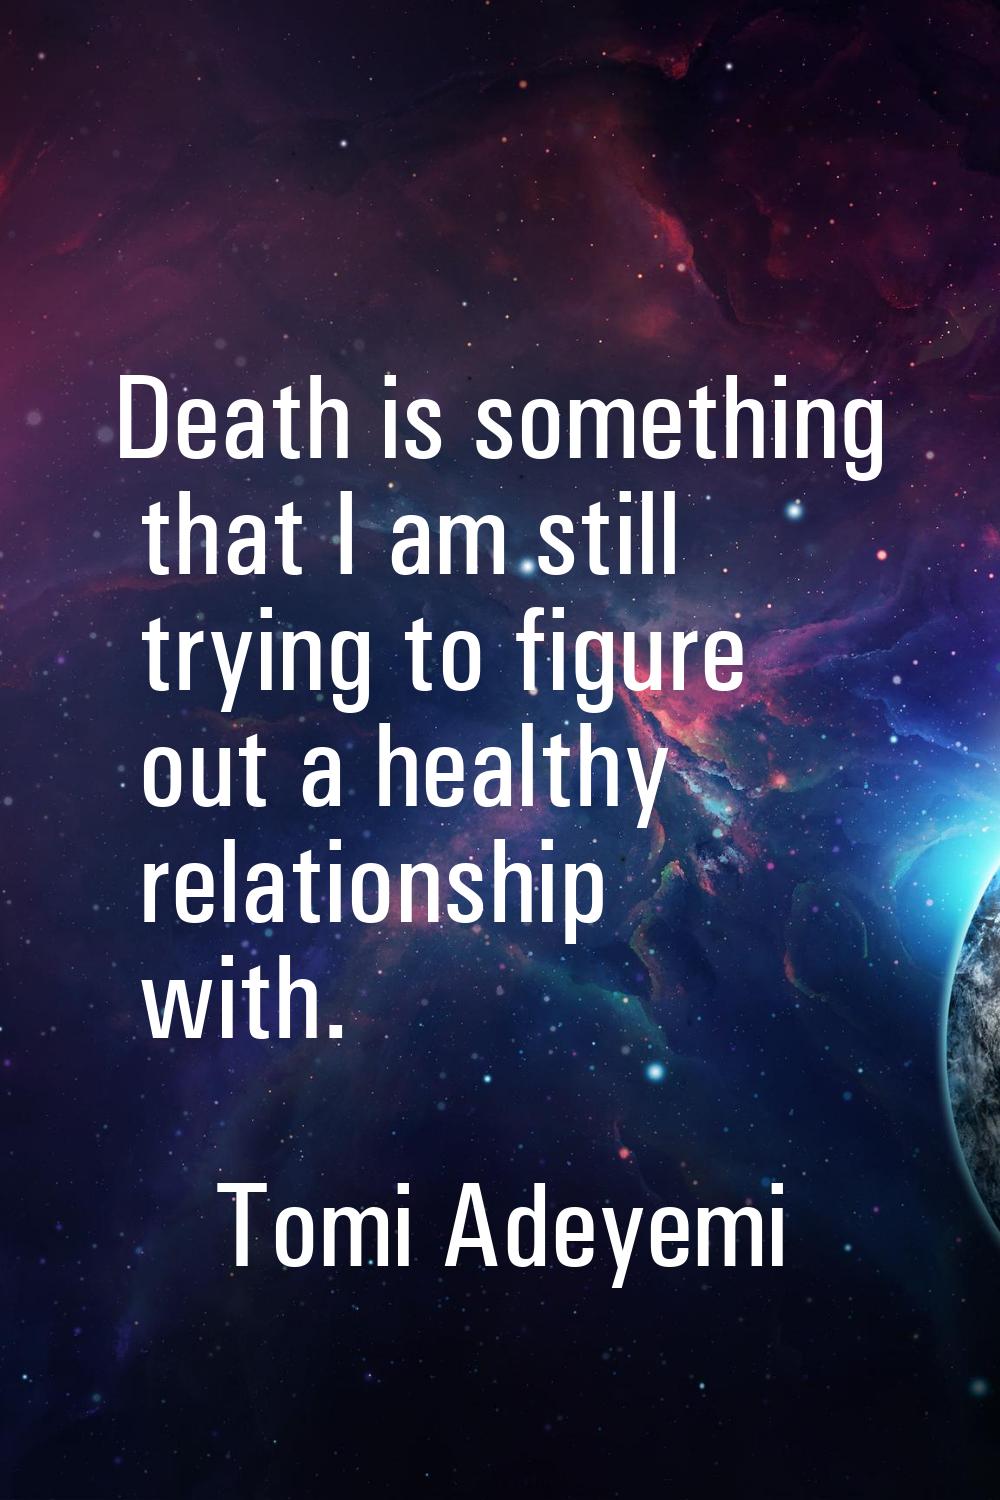 Death is something that I am still trying to figure out a healthy relationship with.